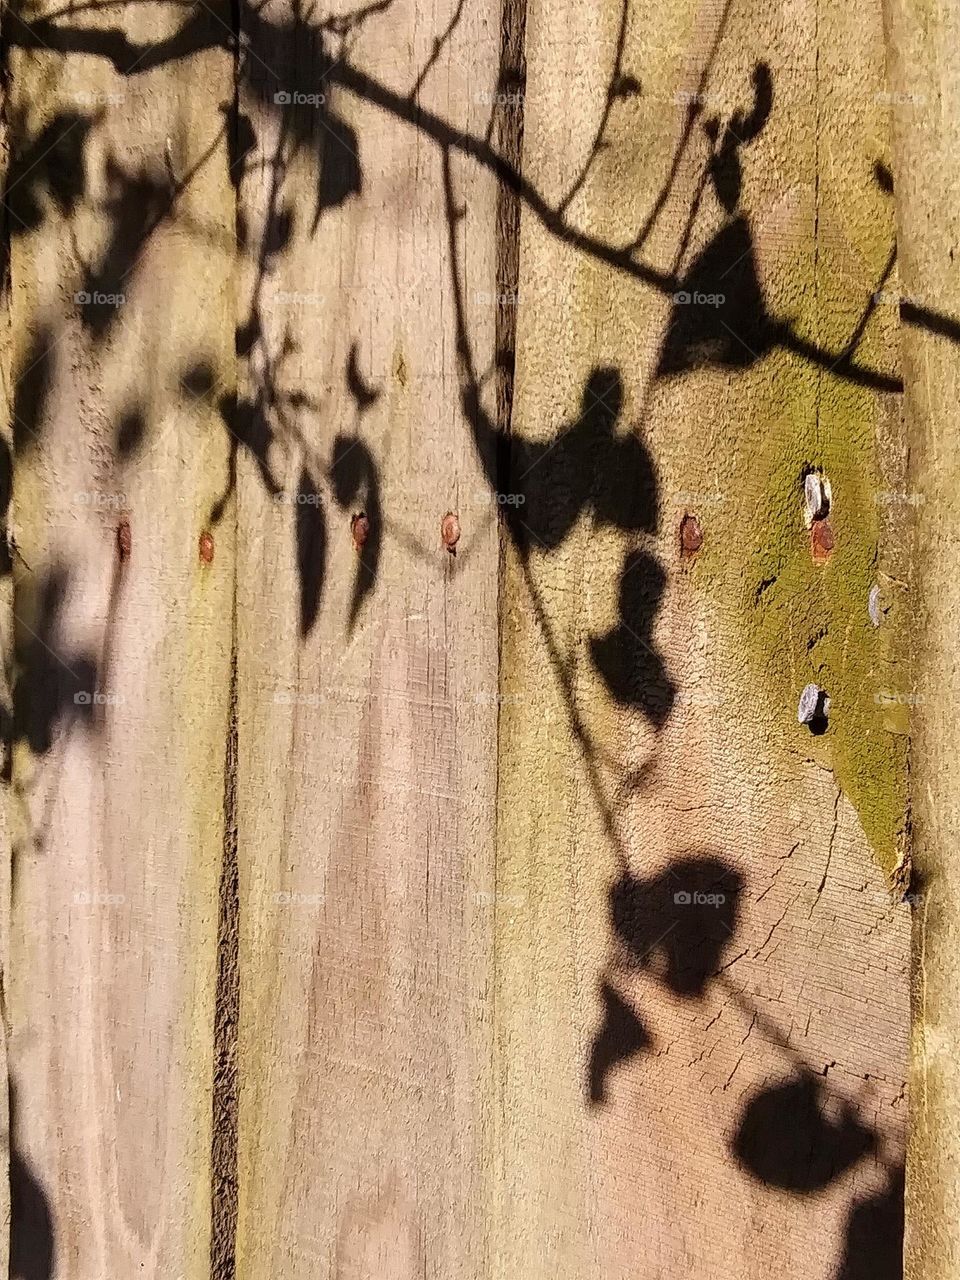 shadows on a wooden fence